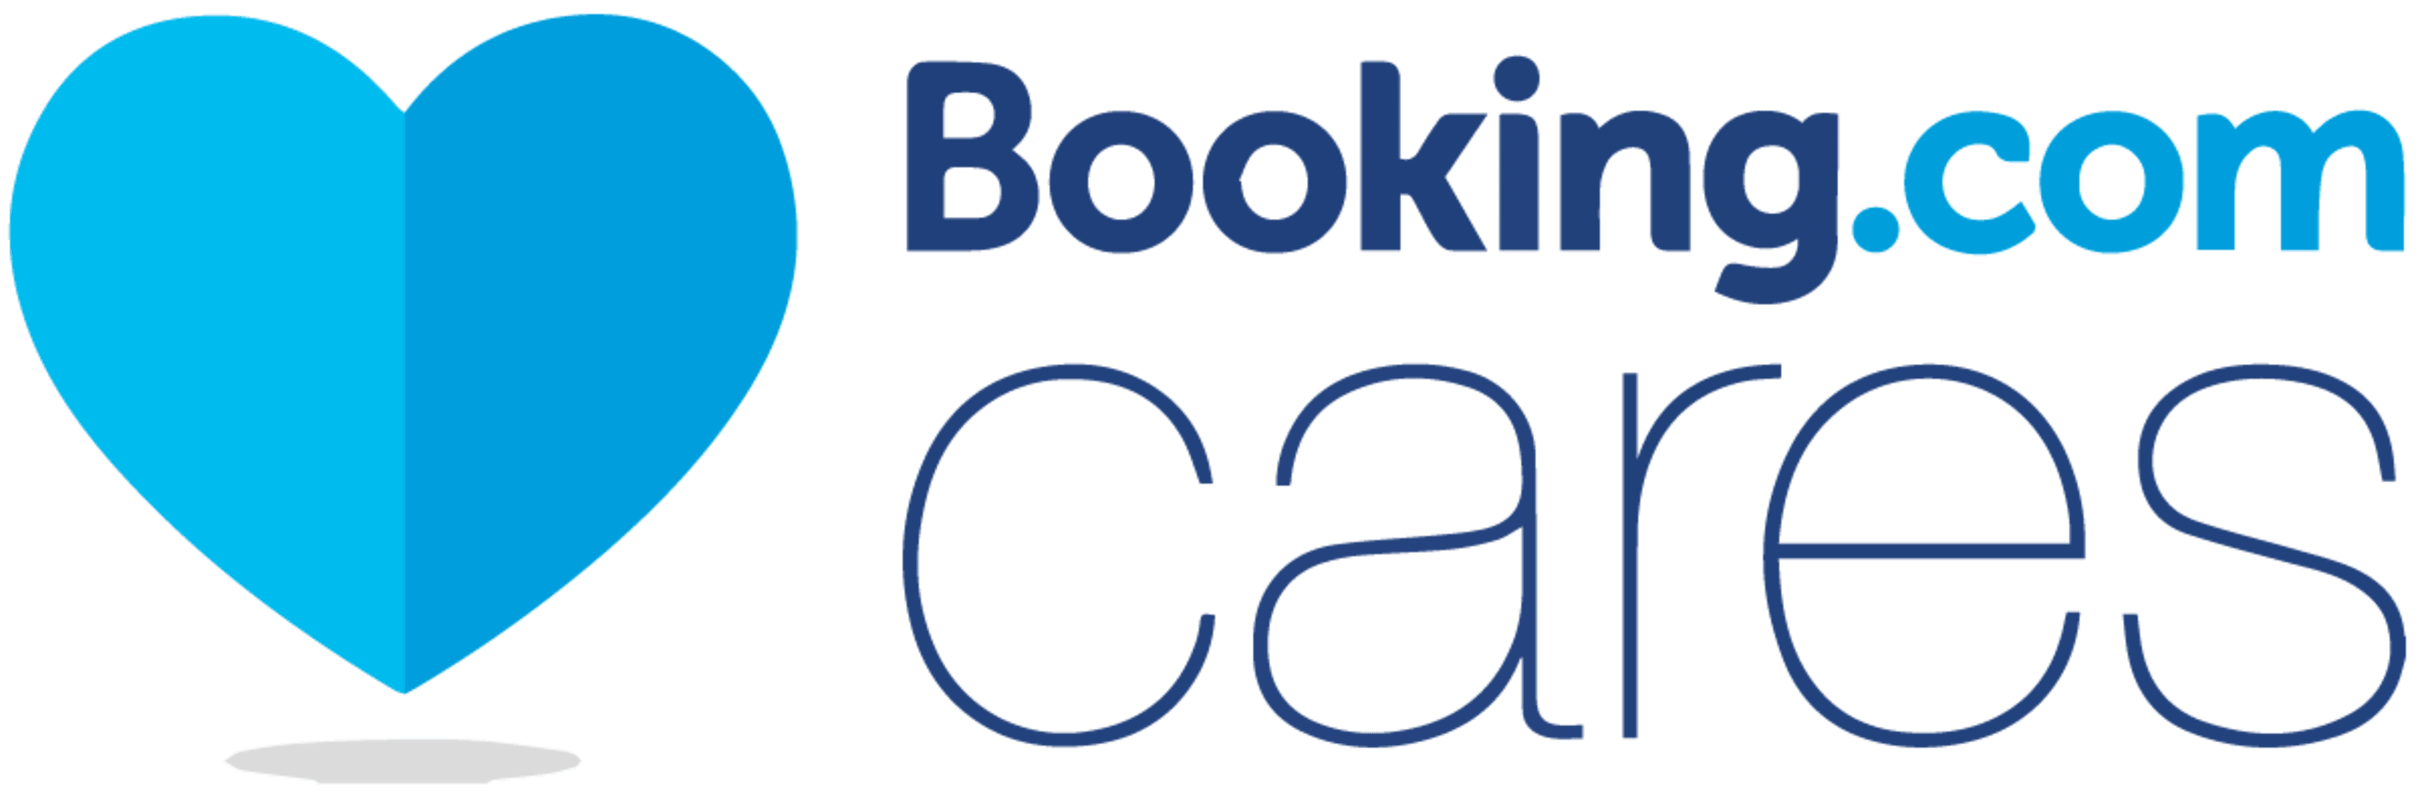 Booking Cares